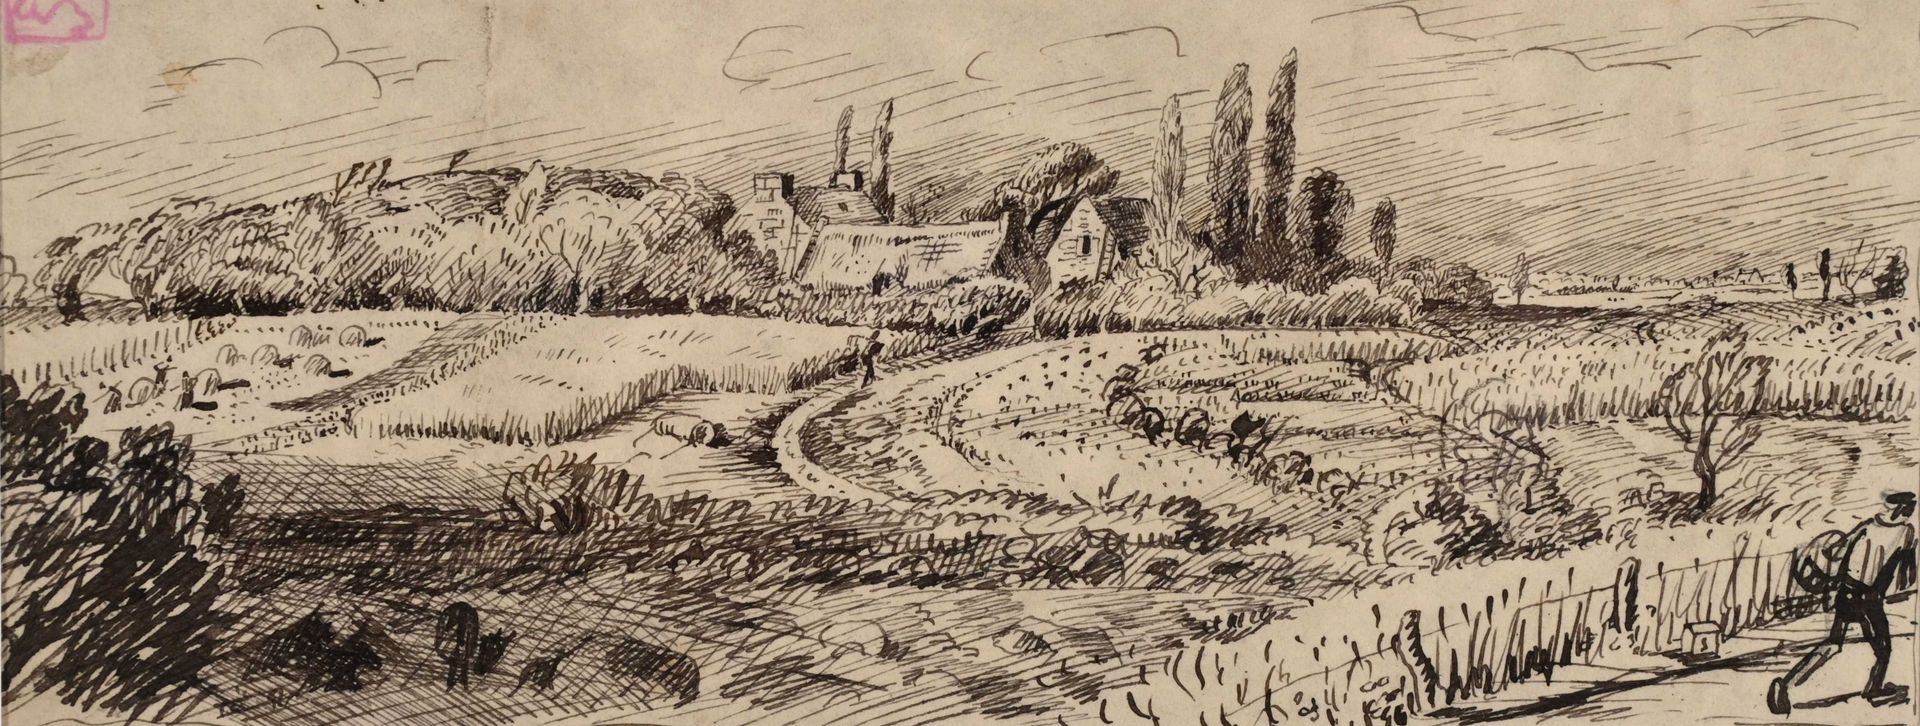 Null Adolphe BEAUFRERE (1876-1960) "Breton farm" ink cahg 8.5x22